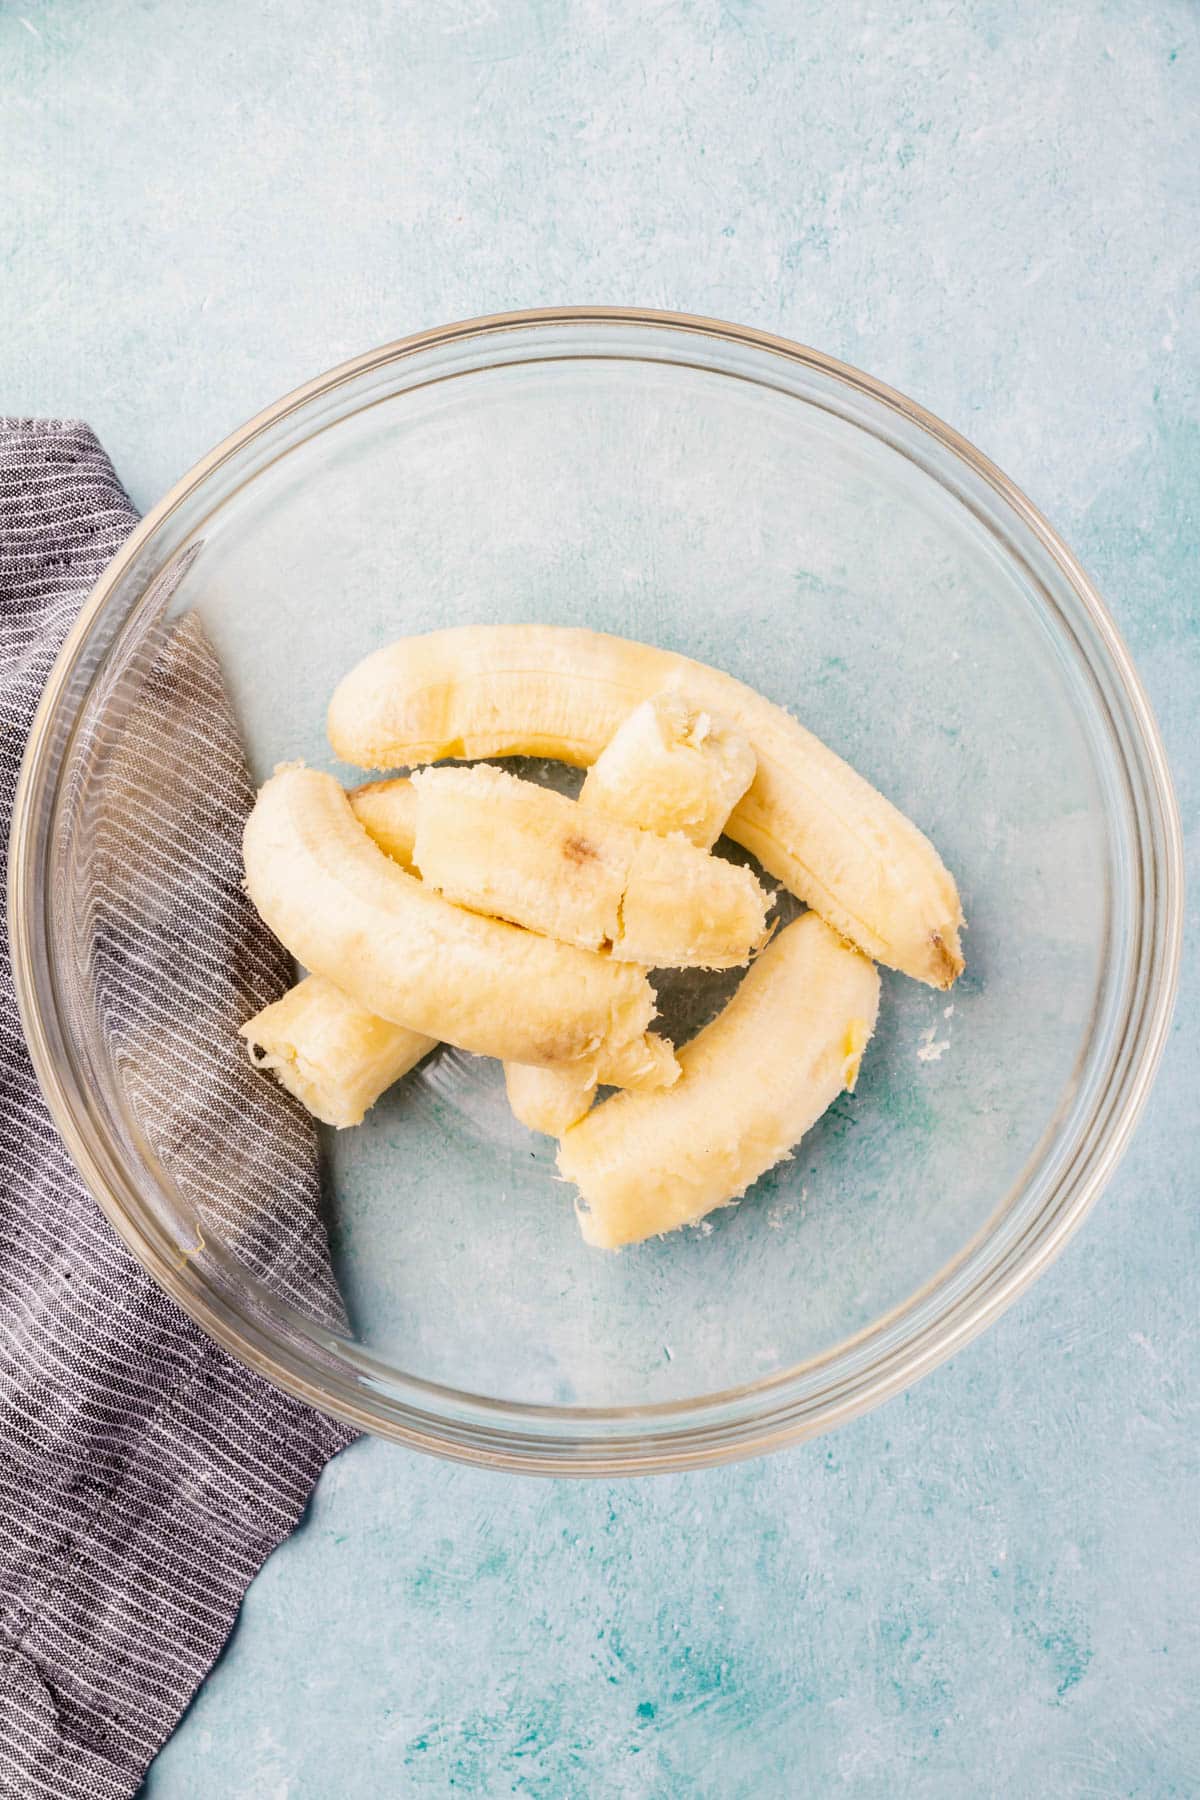 Ripe bananas in a large glass mixing bowl on a blue table.